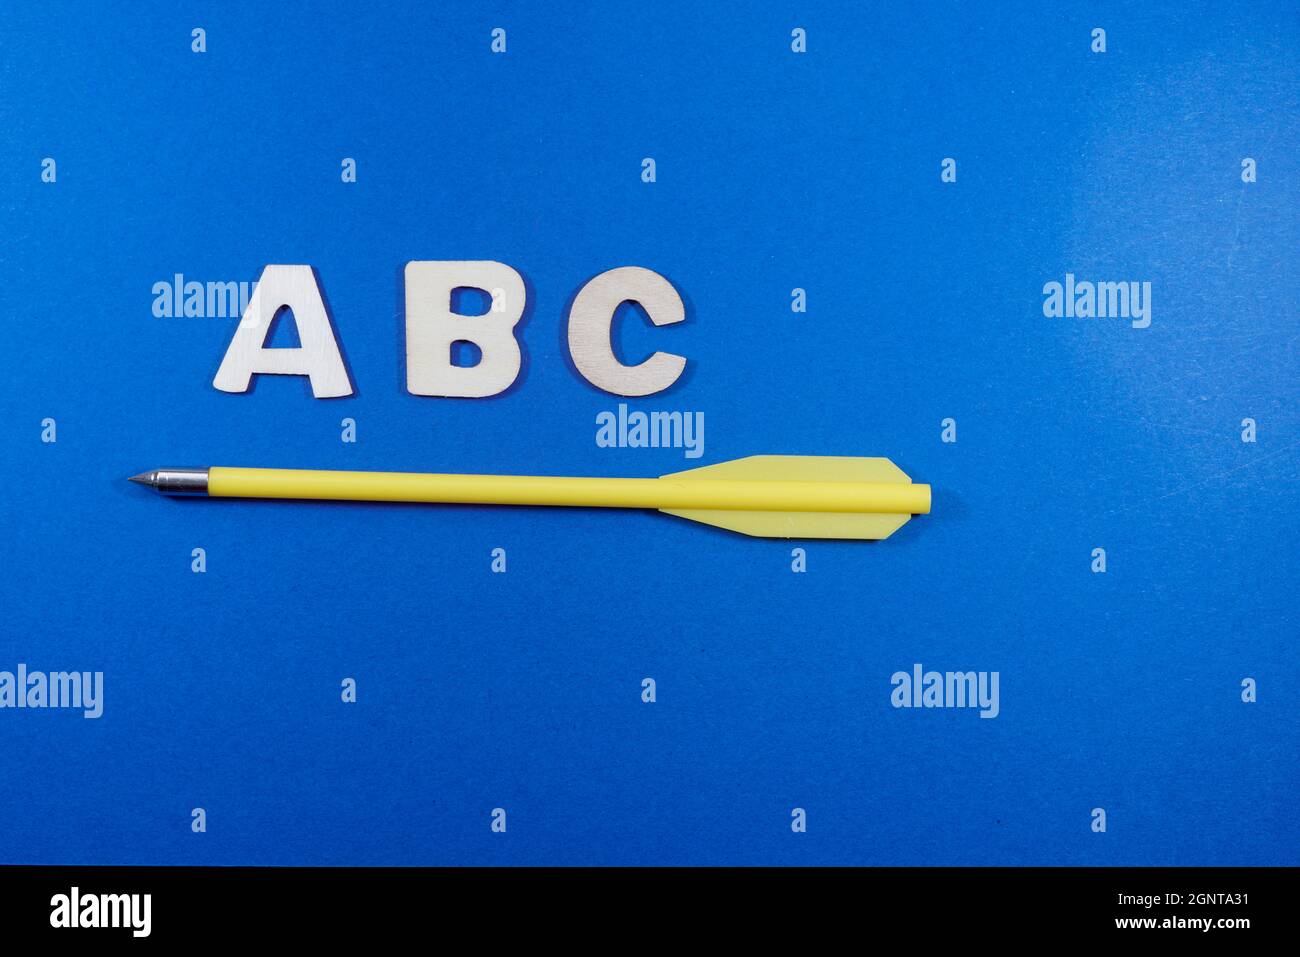 Closeup shot of a yellow pen body under the A B C writing on a blue surface Stock Photo